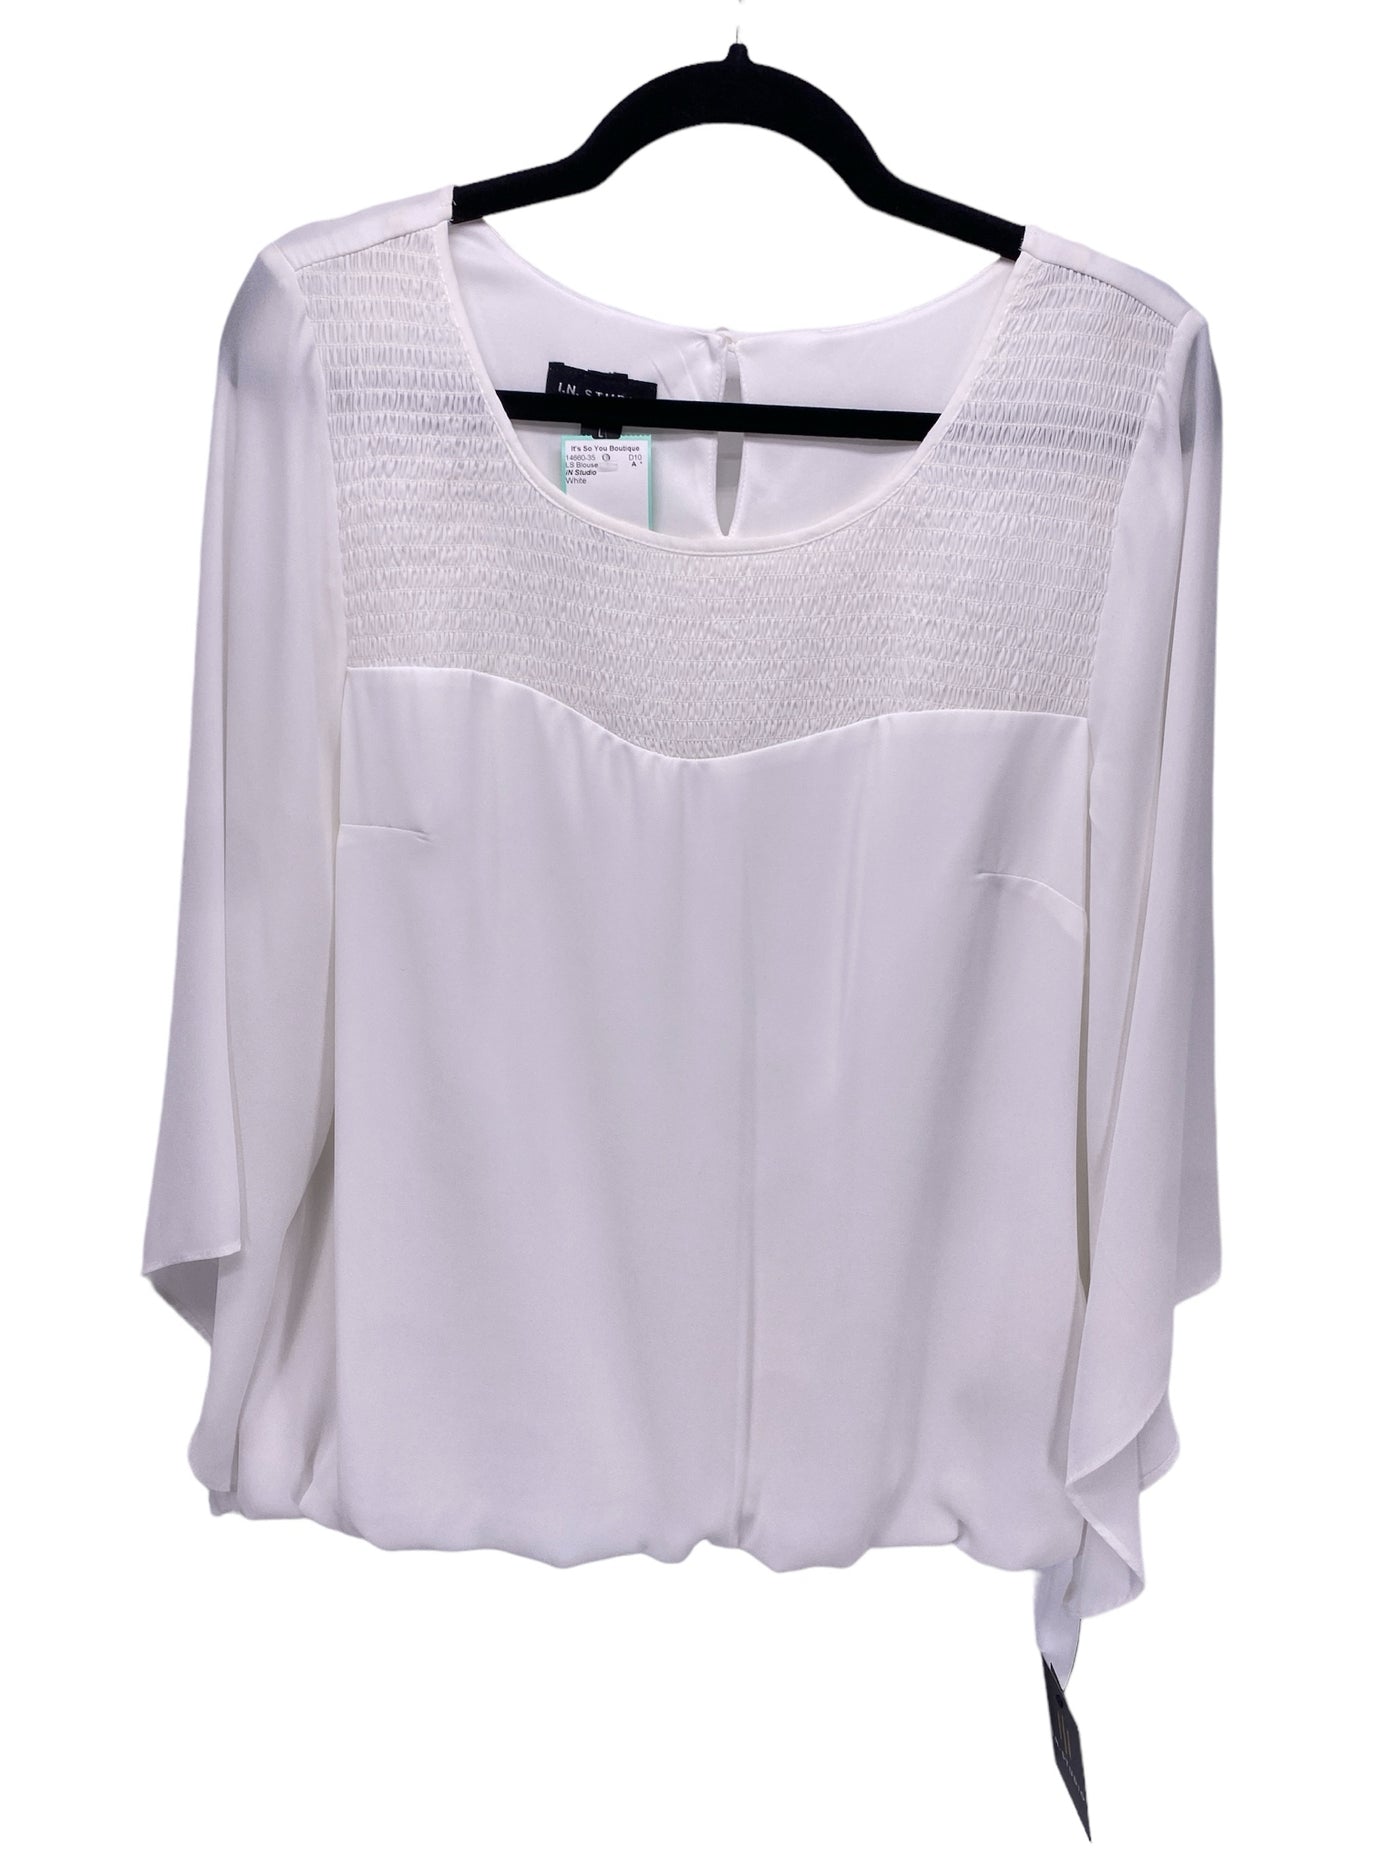 IN Studio Misses Size Large White LS Blouse